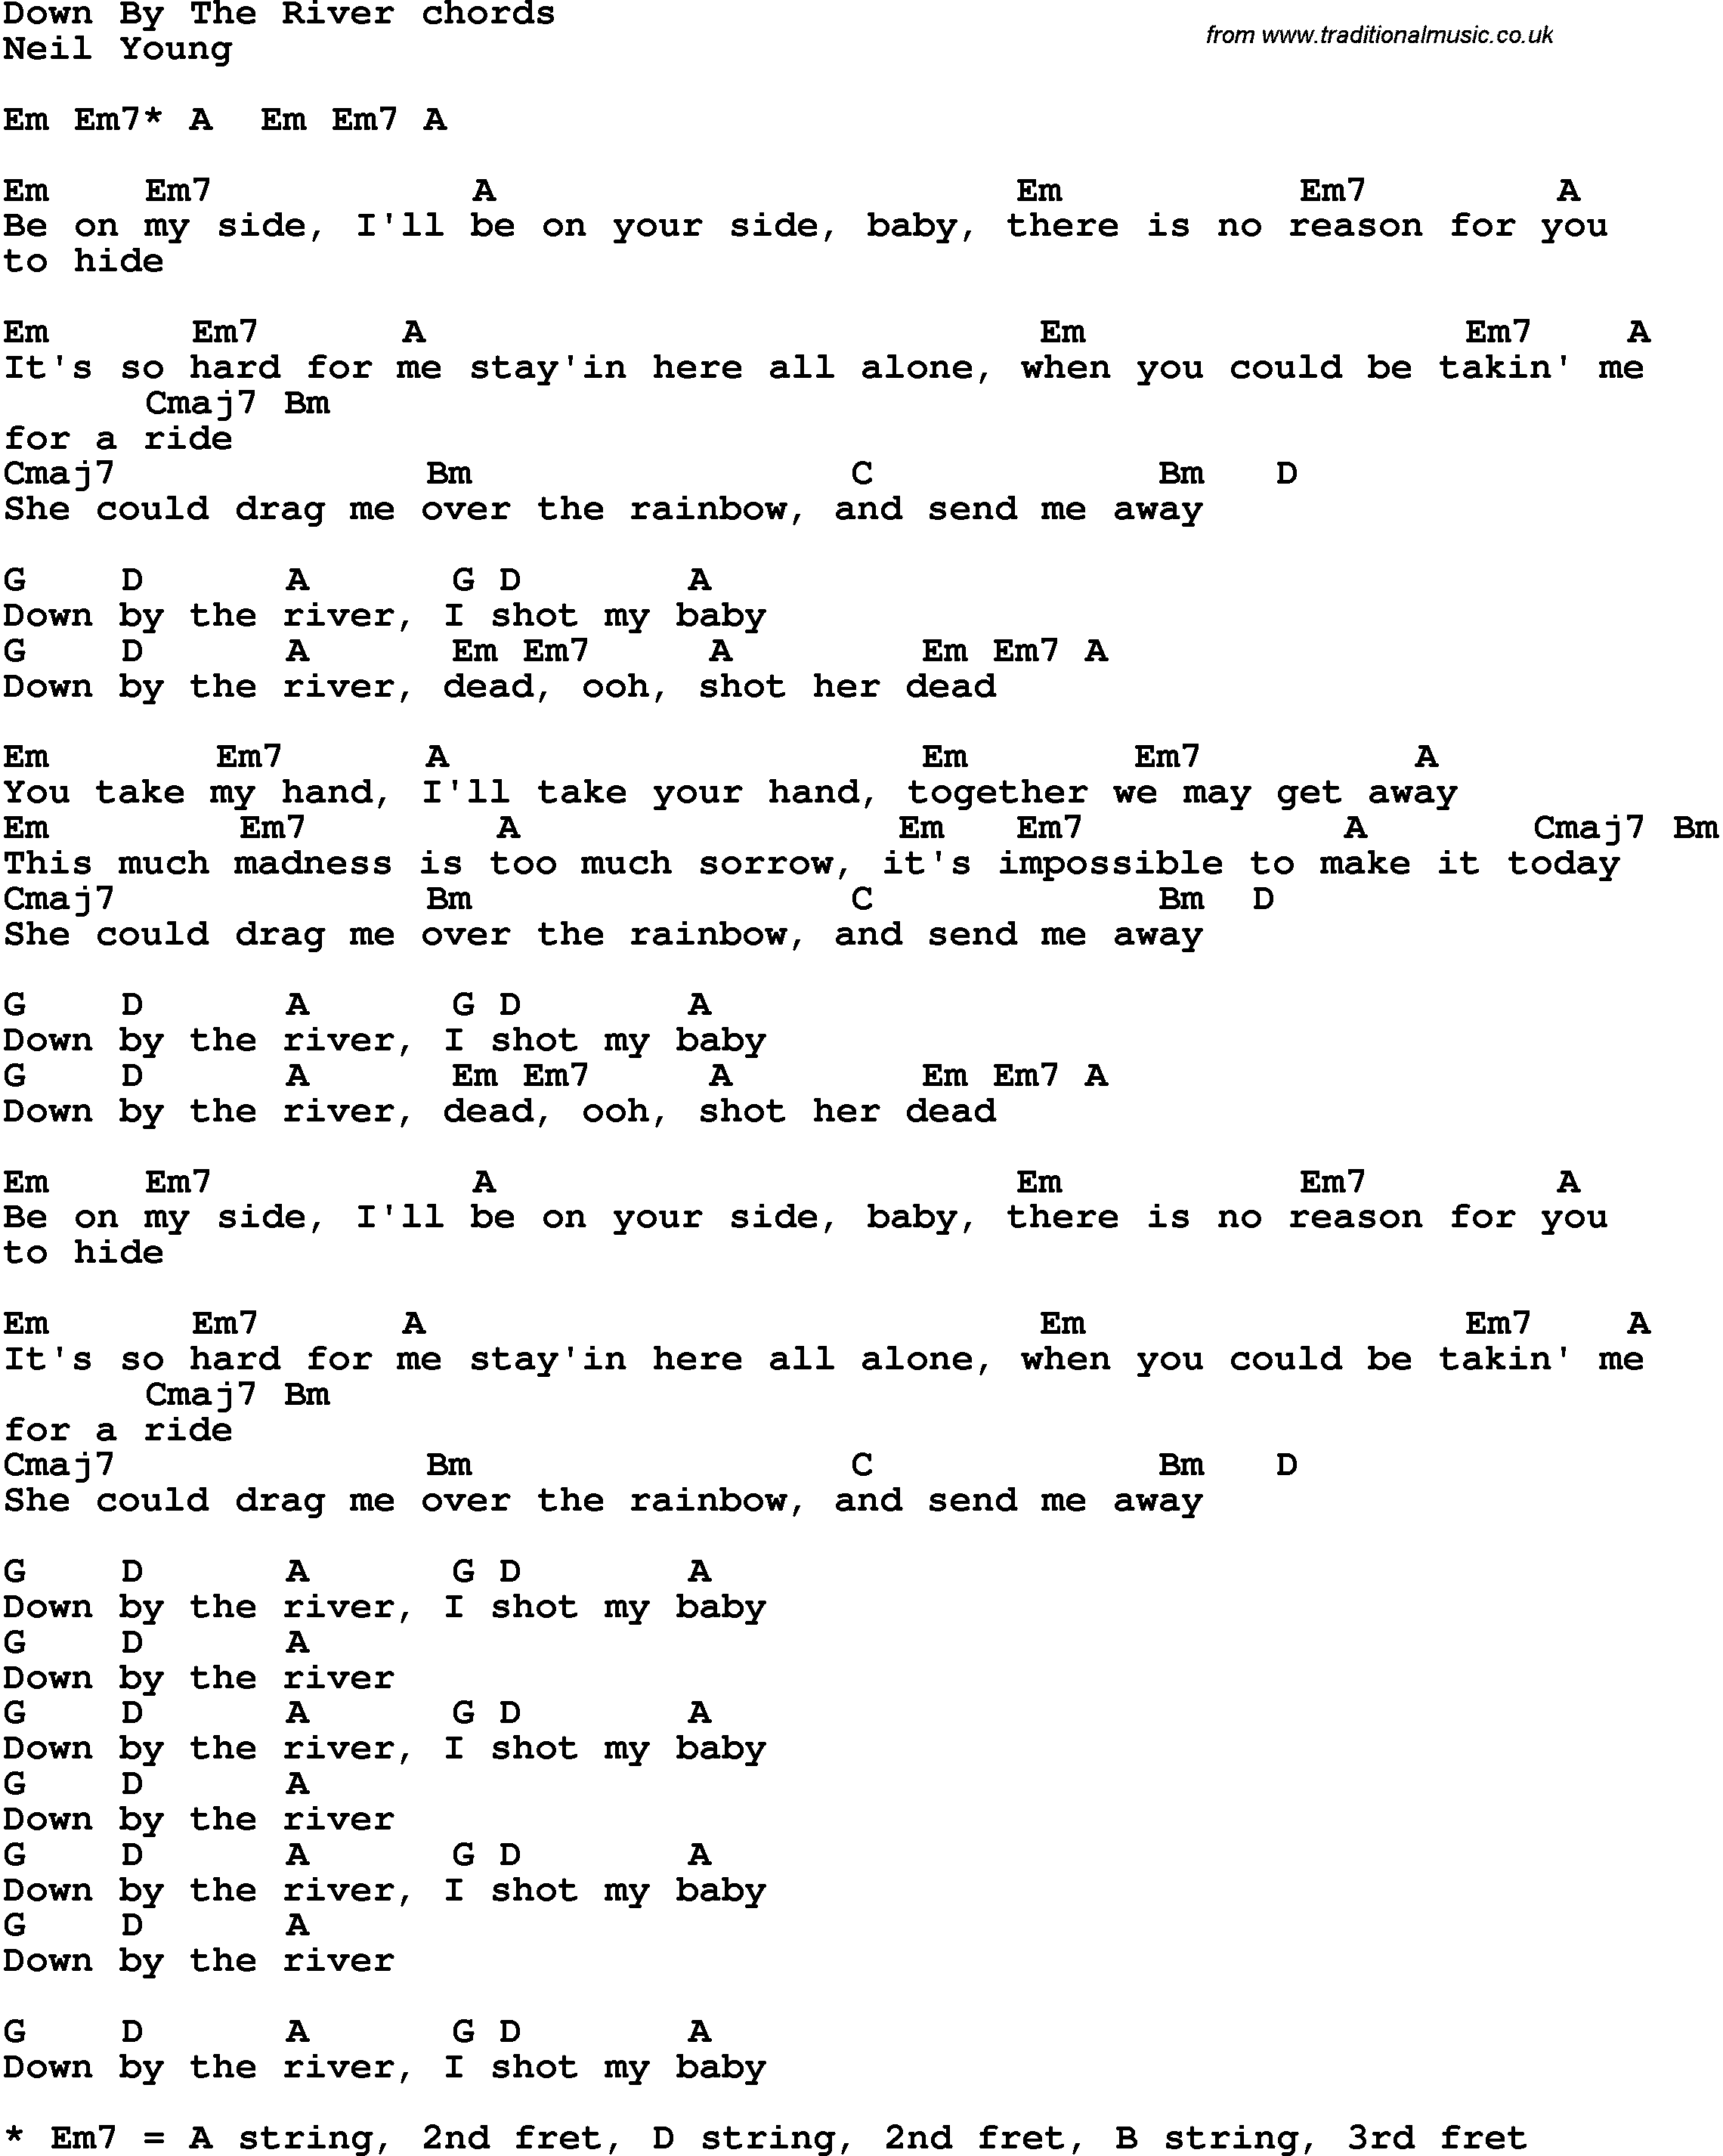 Song Lyrics with guitar chords for Down By The River